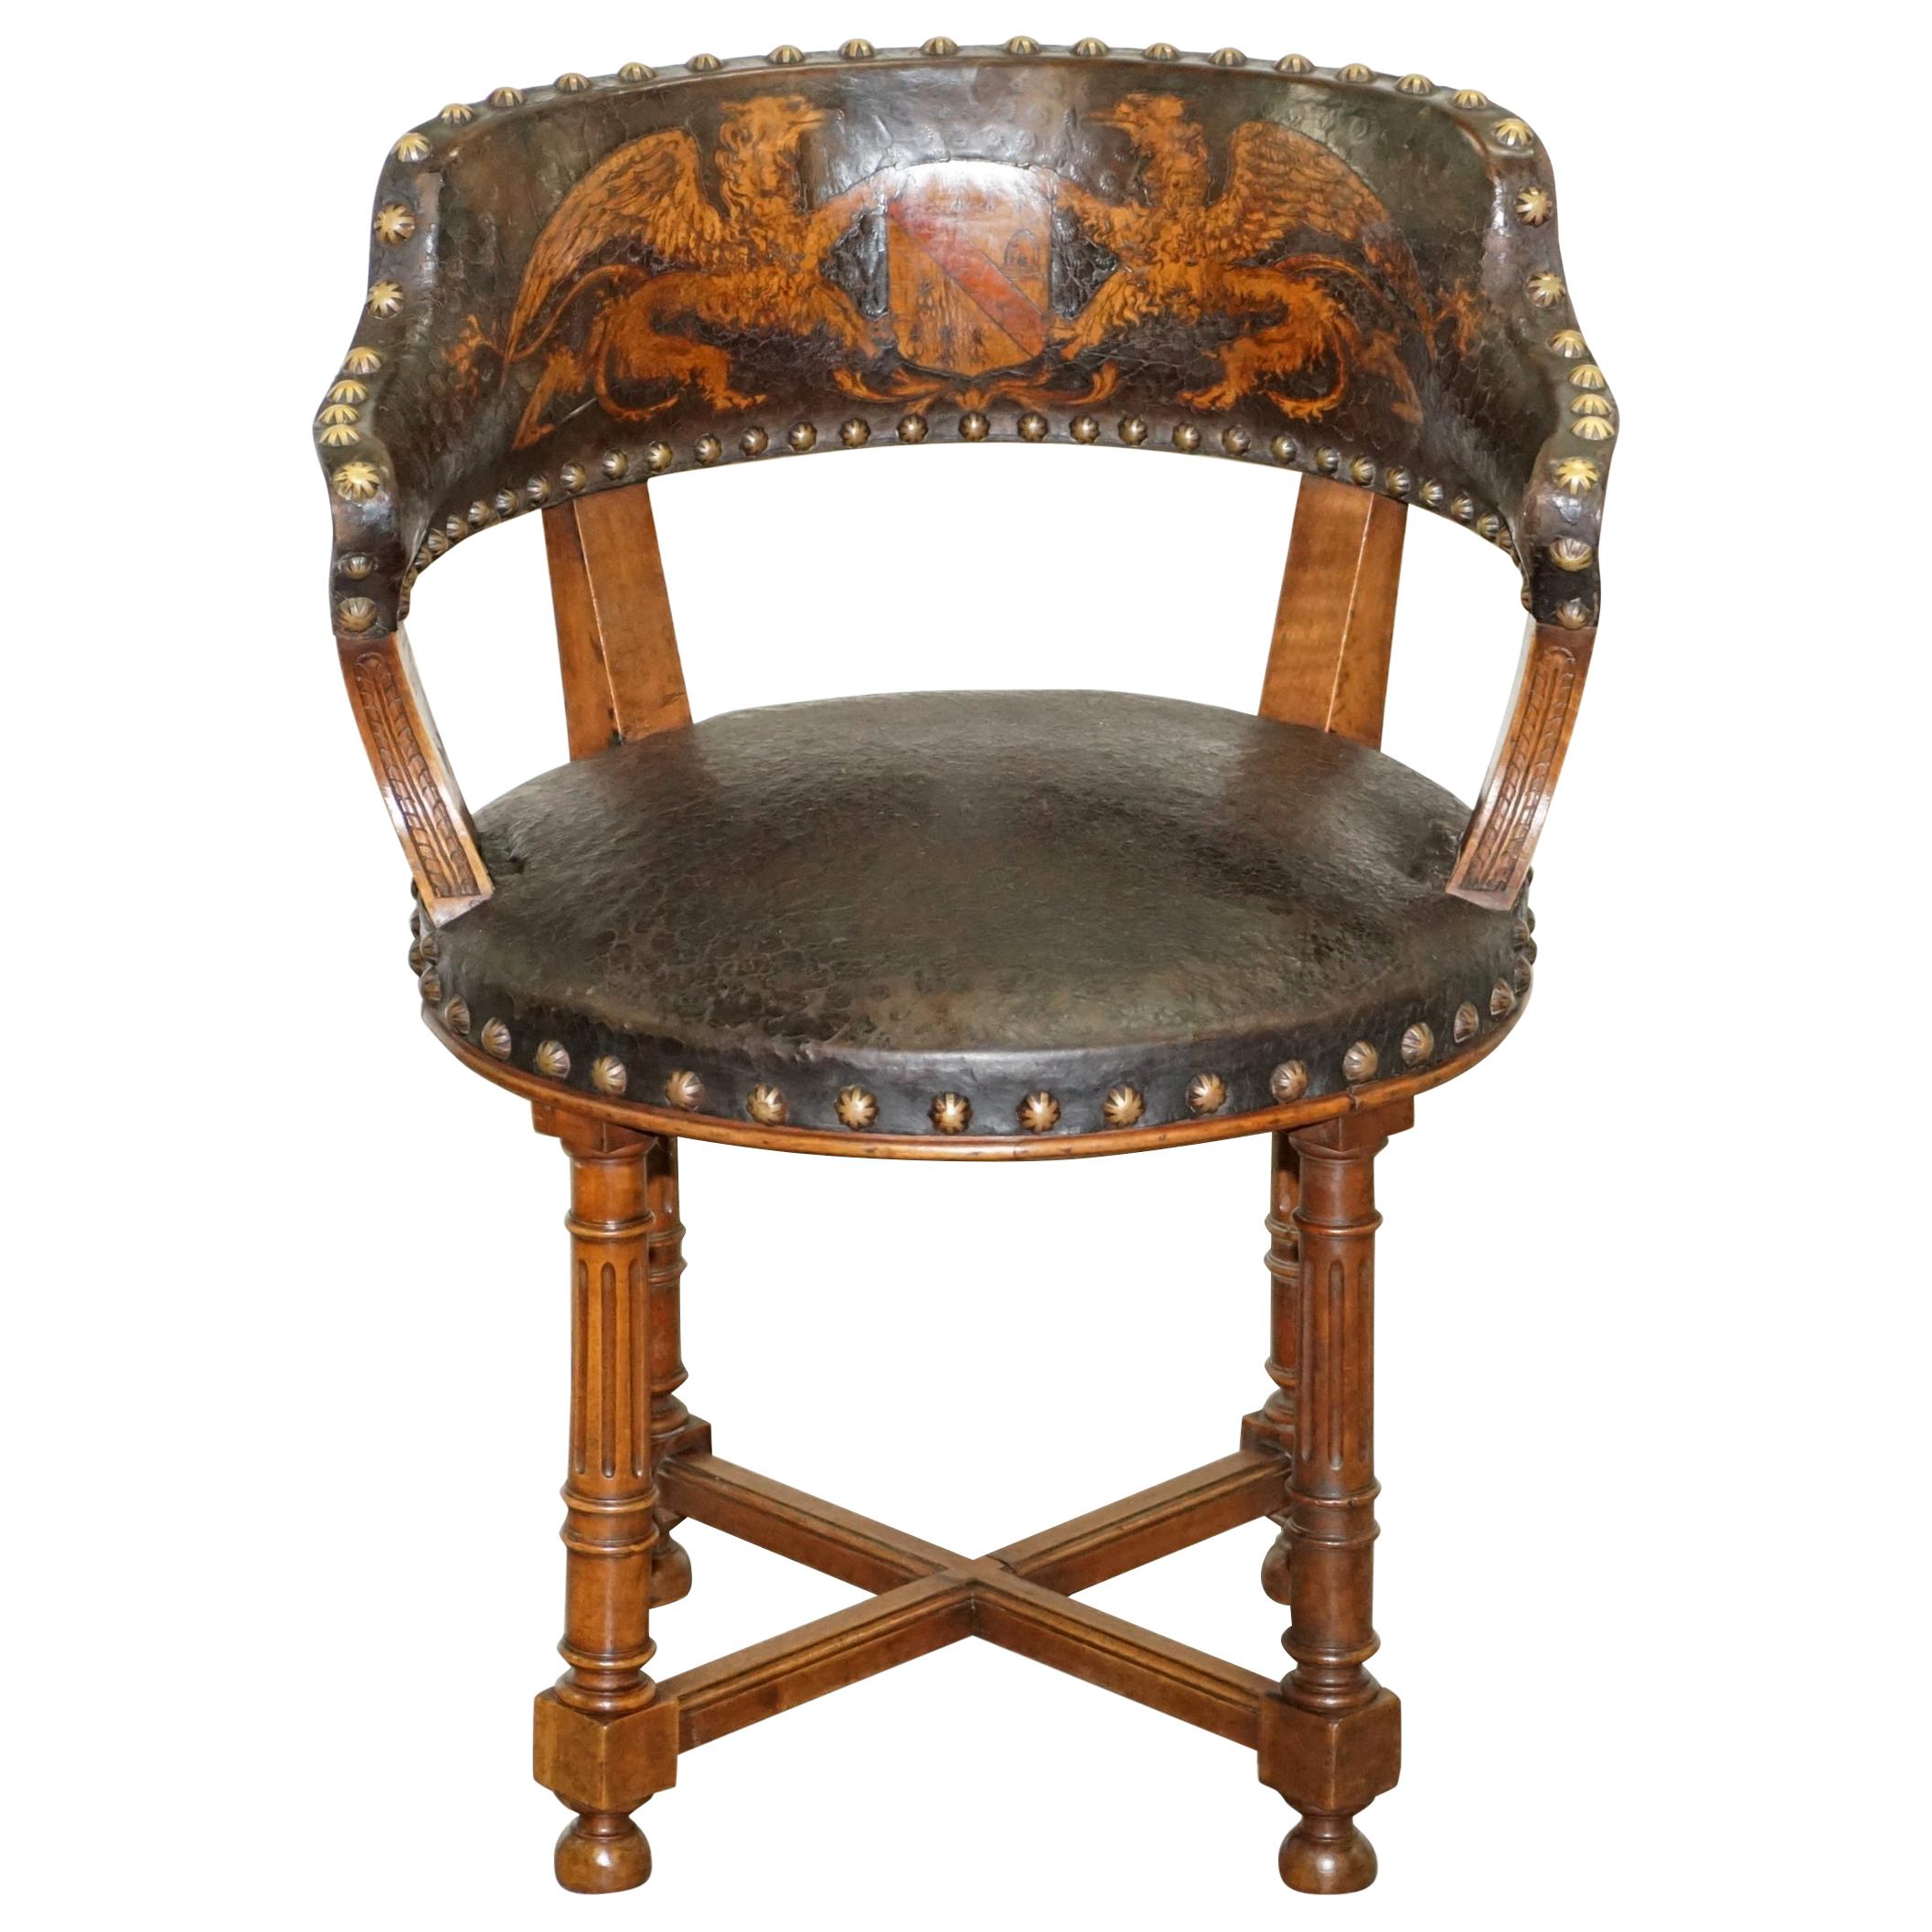 Antique Captains Chair with Embossed Leather Armorial Coat of Arms, circa 1880